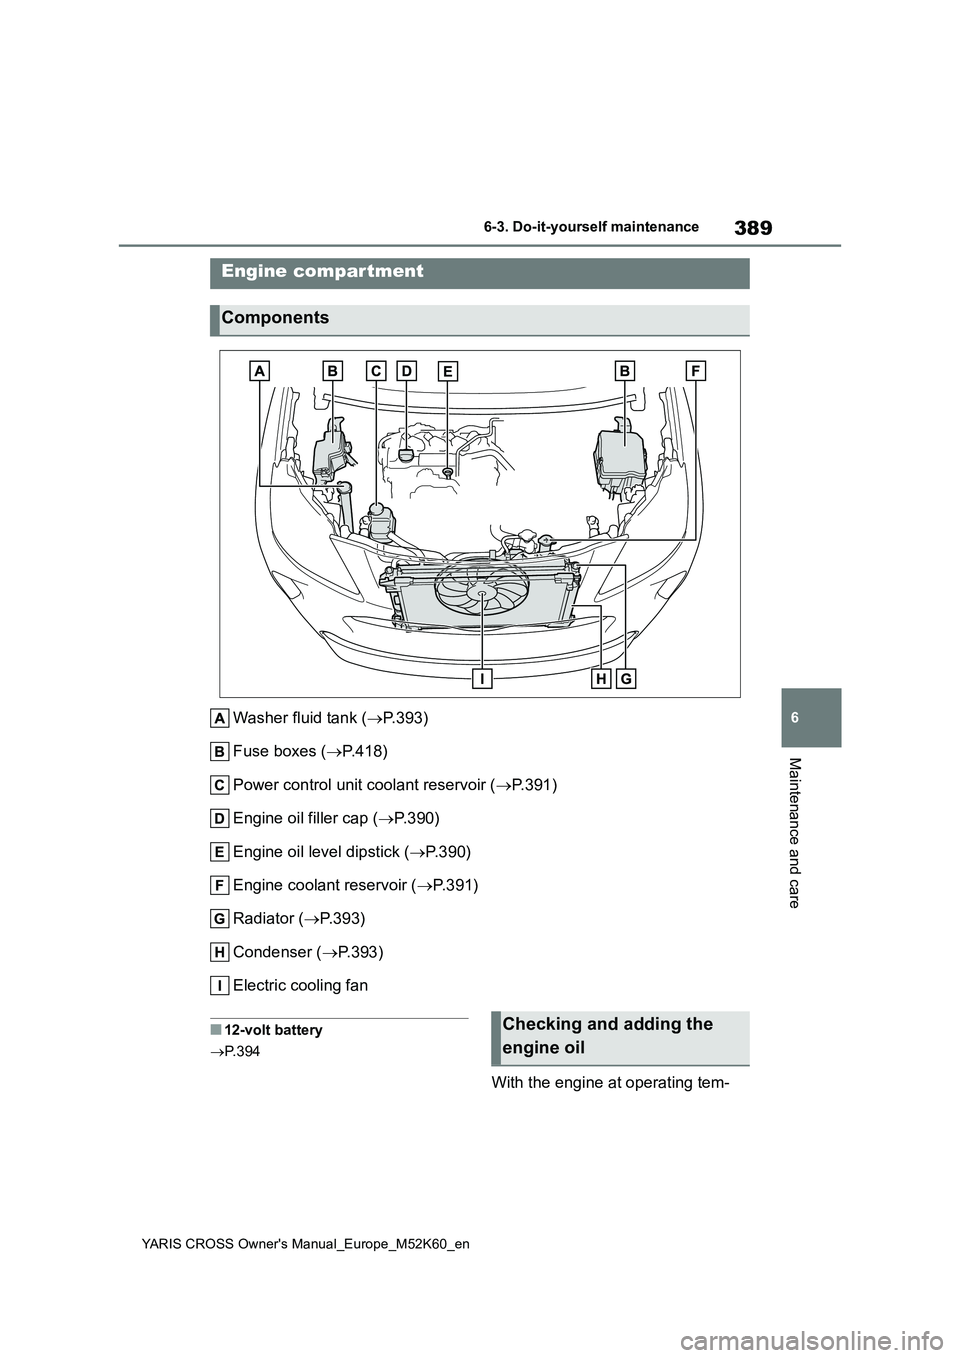 TOYOTA YARIS CROSS 2021 User Guide 389
6
YARIS CROSS Owner's Manual_Europe_M52K60_en
6-3. Do-it-yourself maintenance
Maintenance and care
Washer fluid tank (P.393) 
Fuse boxes ( P.418) 
Power control unit coolant reservoir ( 